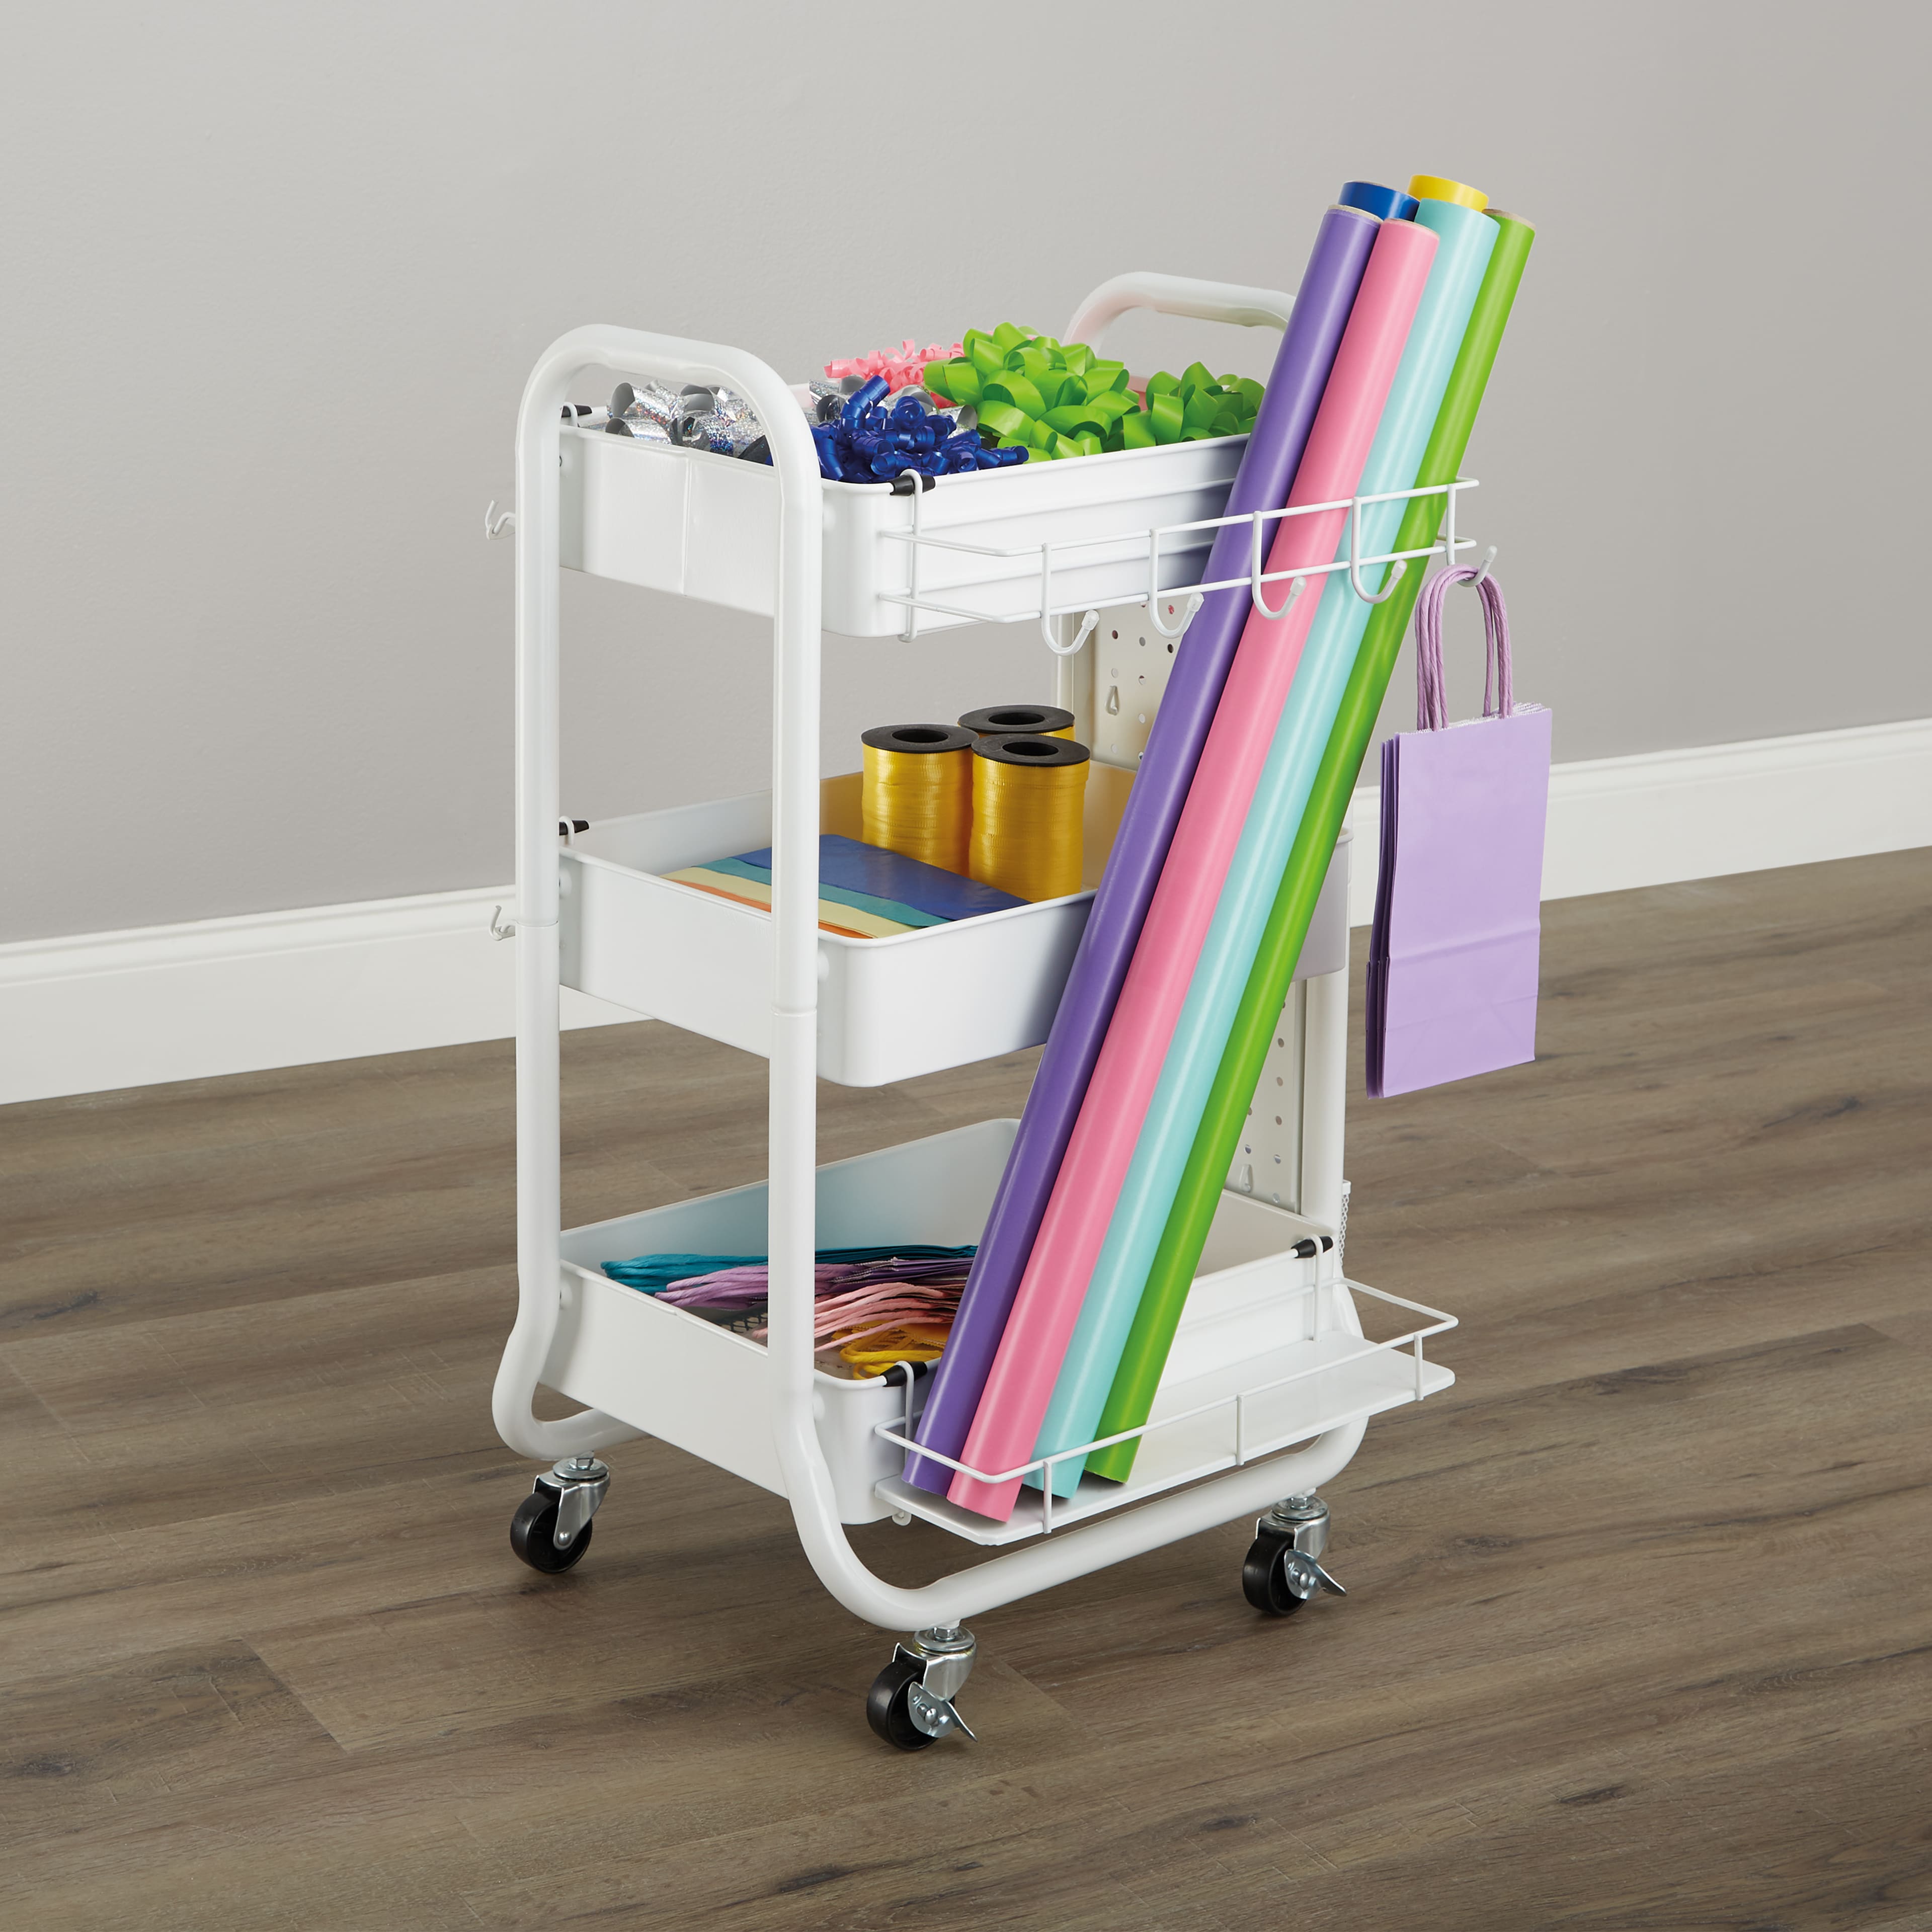 12 Pack: Gramercy Rolling Cart by Simply Tidy™